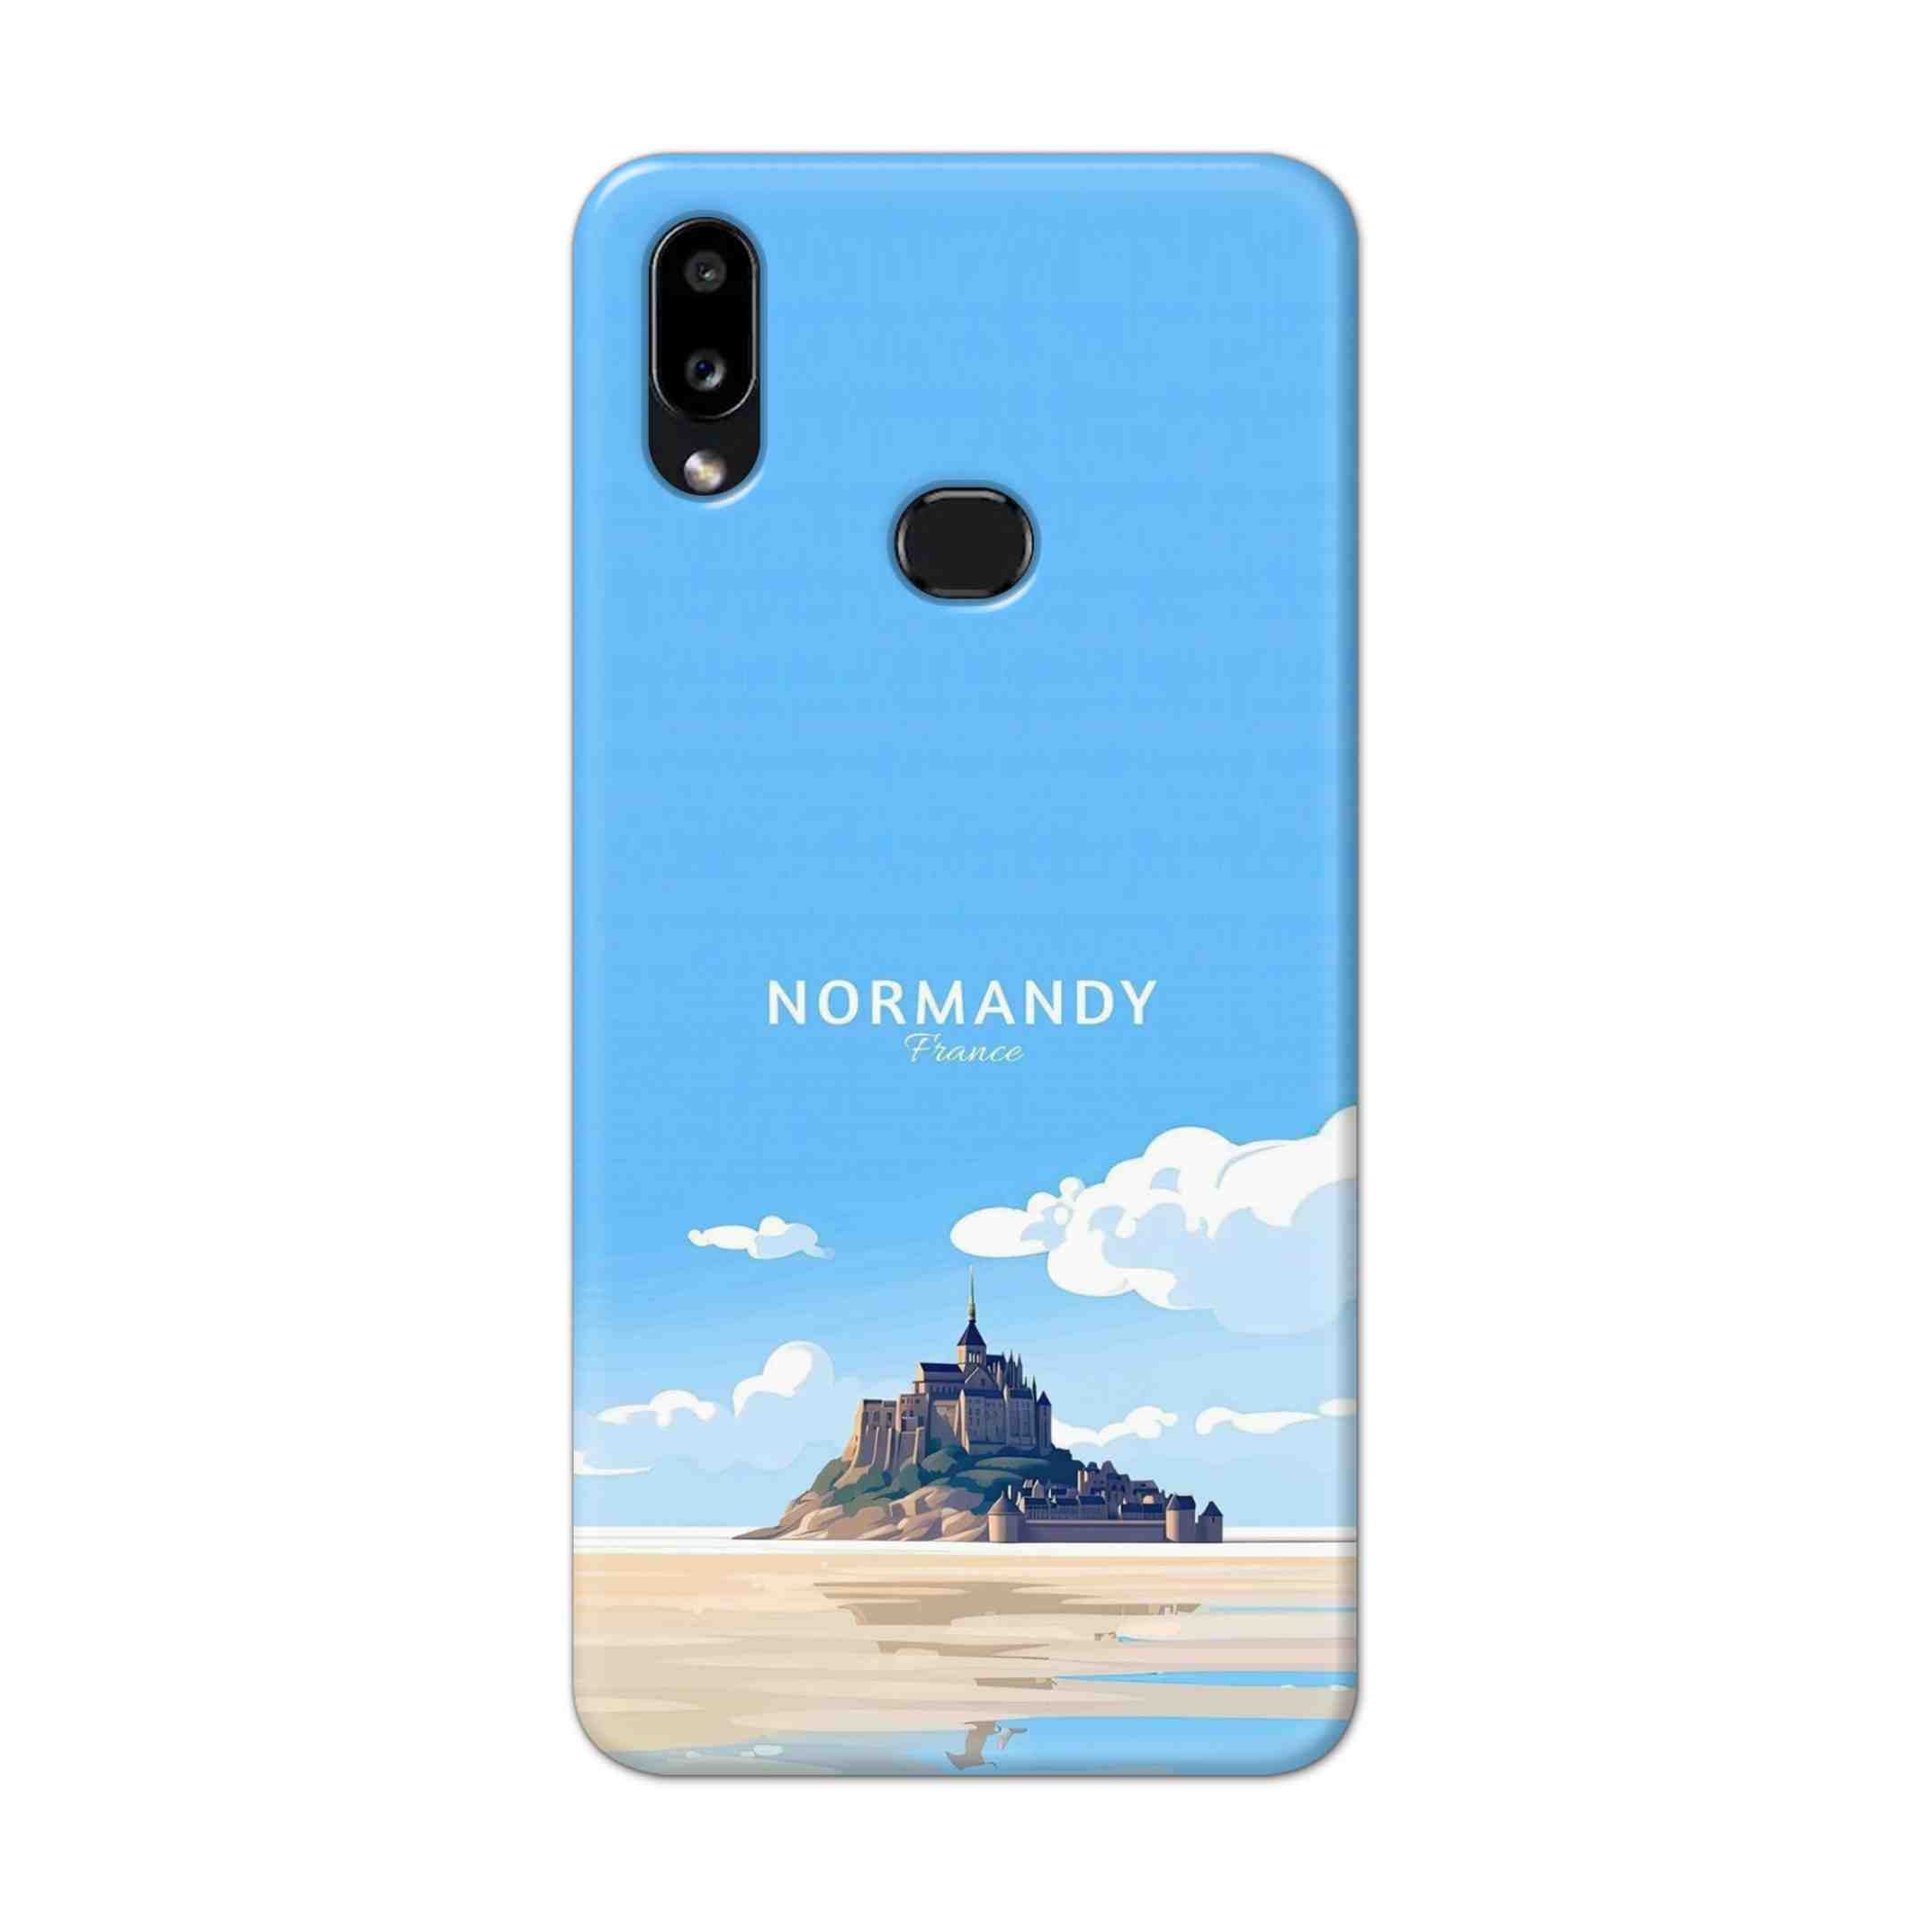 Buy Normandy Hard Back Mobile Phone Case Cover For Samsung Galaxy M01s Online